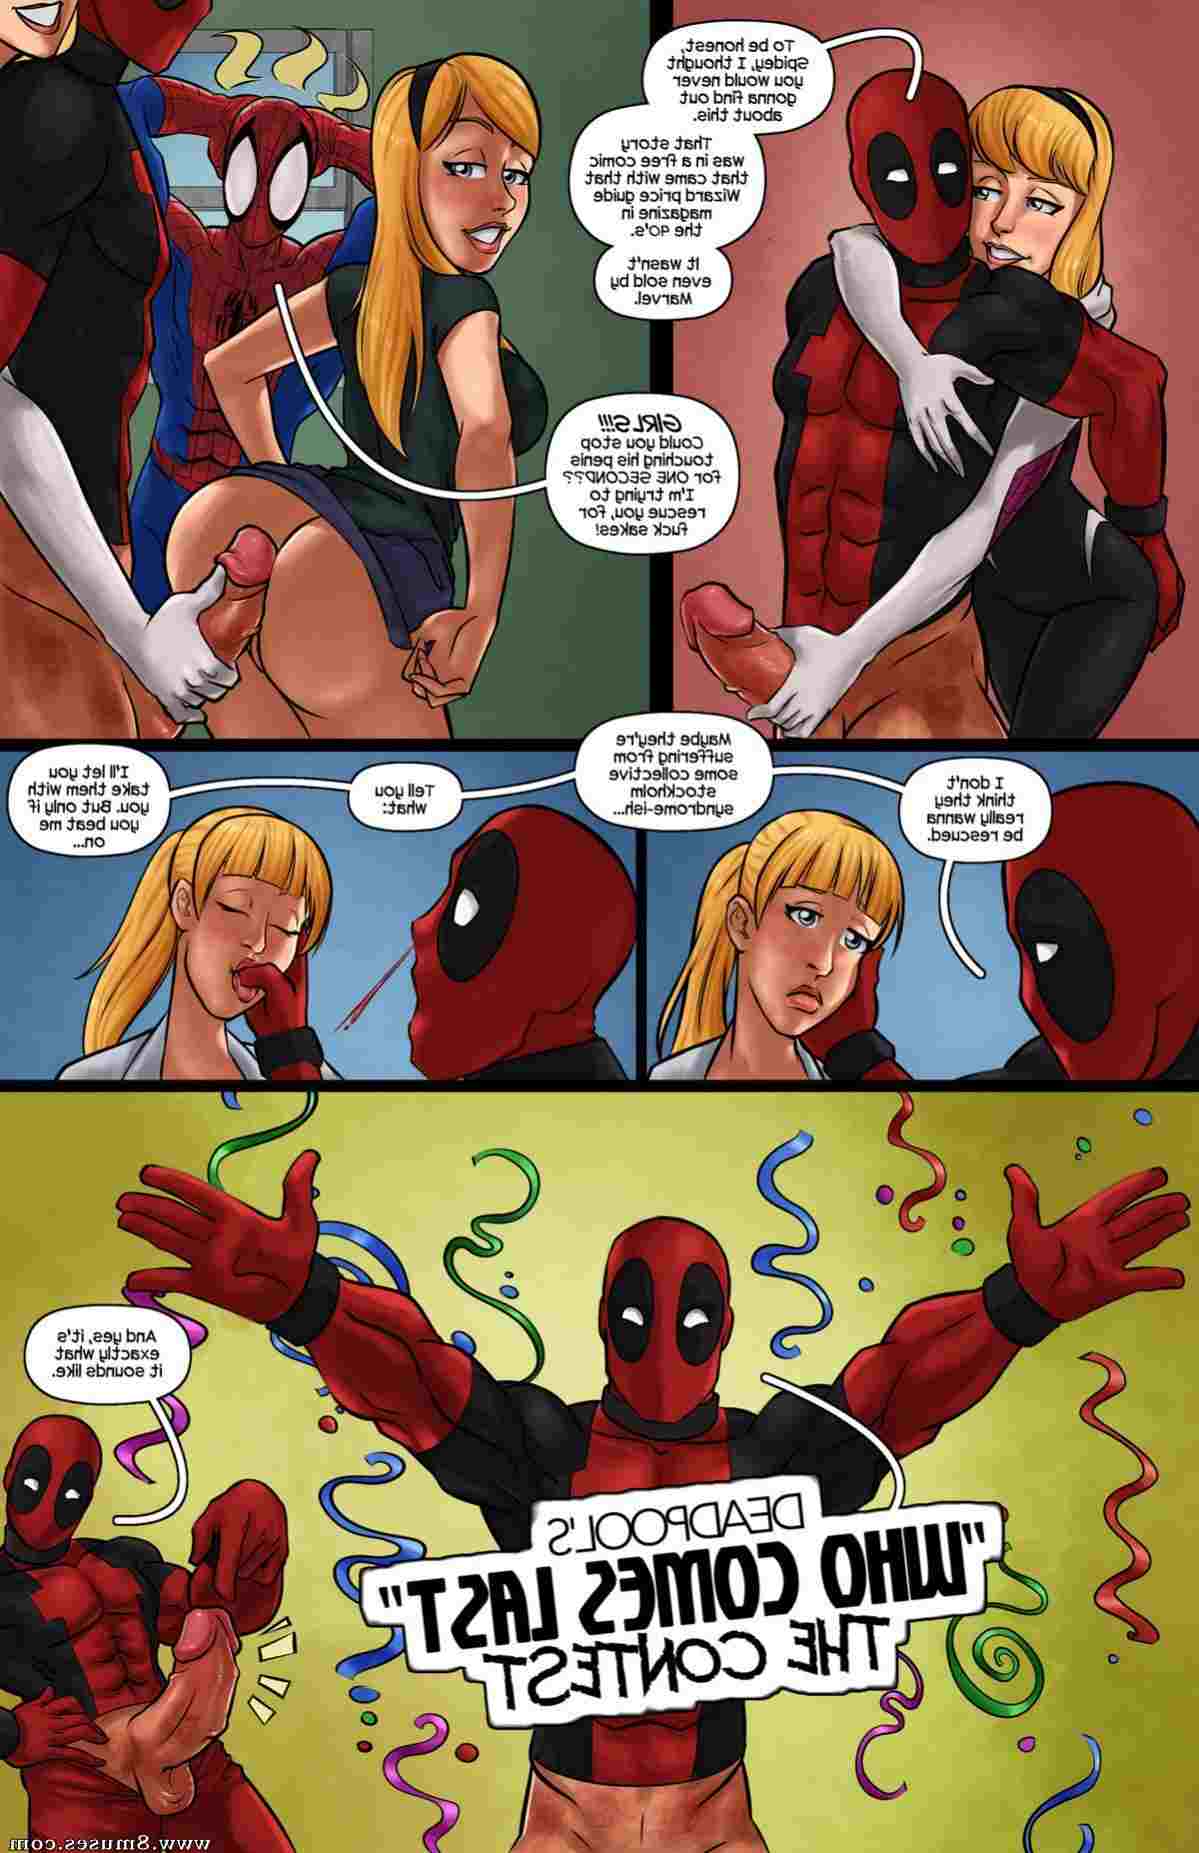 Tracy-Scops-Comics/Gwen-Stacies-are-the-sole-property-of-Deadpool Gwen_Stacies_are_the_sole_property_of_Deadpool__8muses_-_Sex_and_Porn_Comics_4.jpg